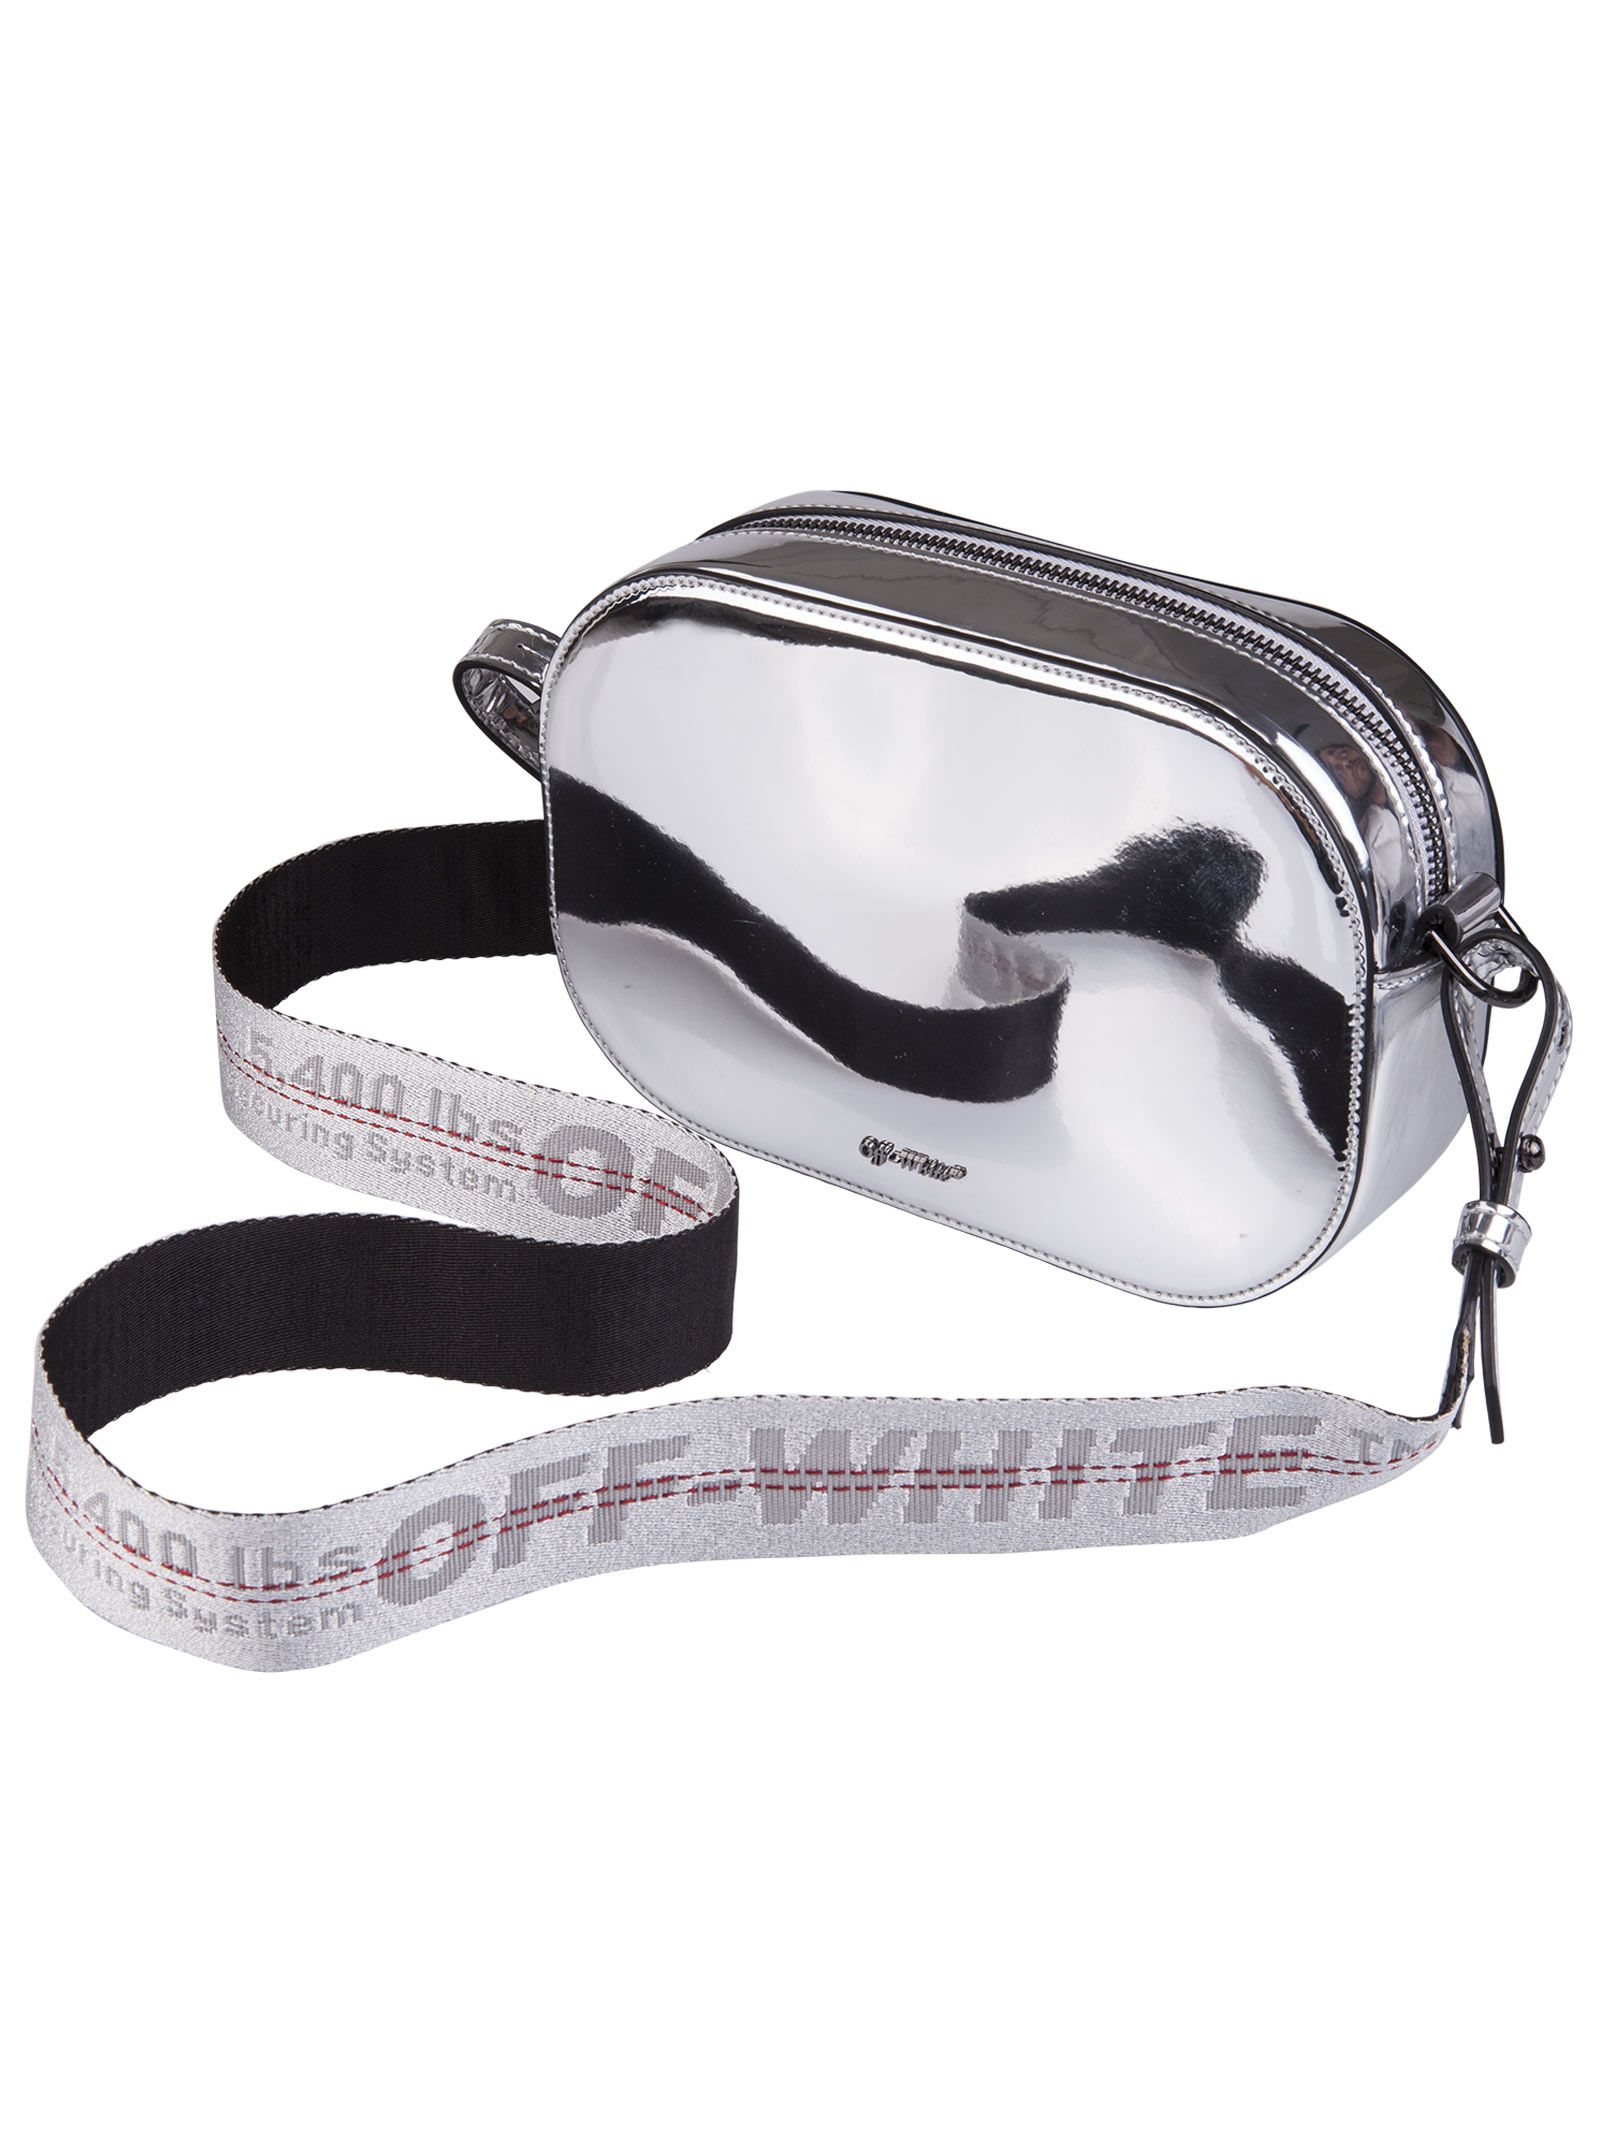 italist | Best price in the market for Off-White Off-white Shoulder Bag - Acciaio - 10707163 ...